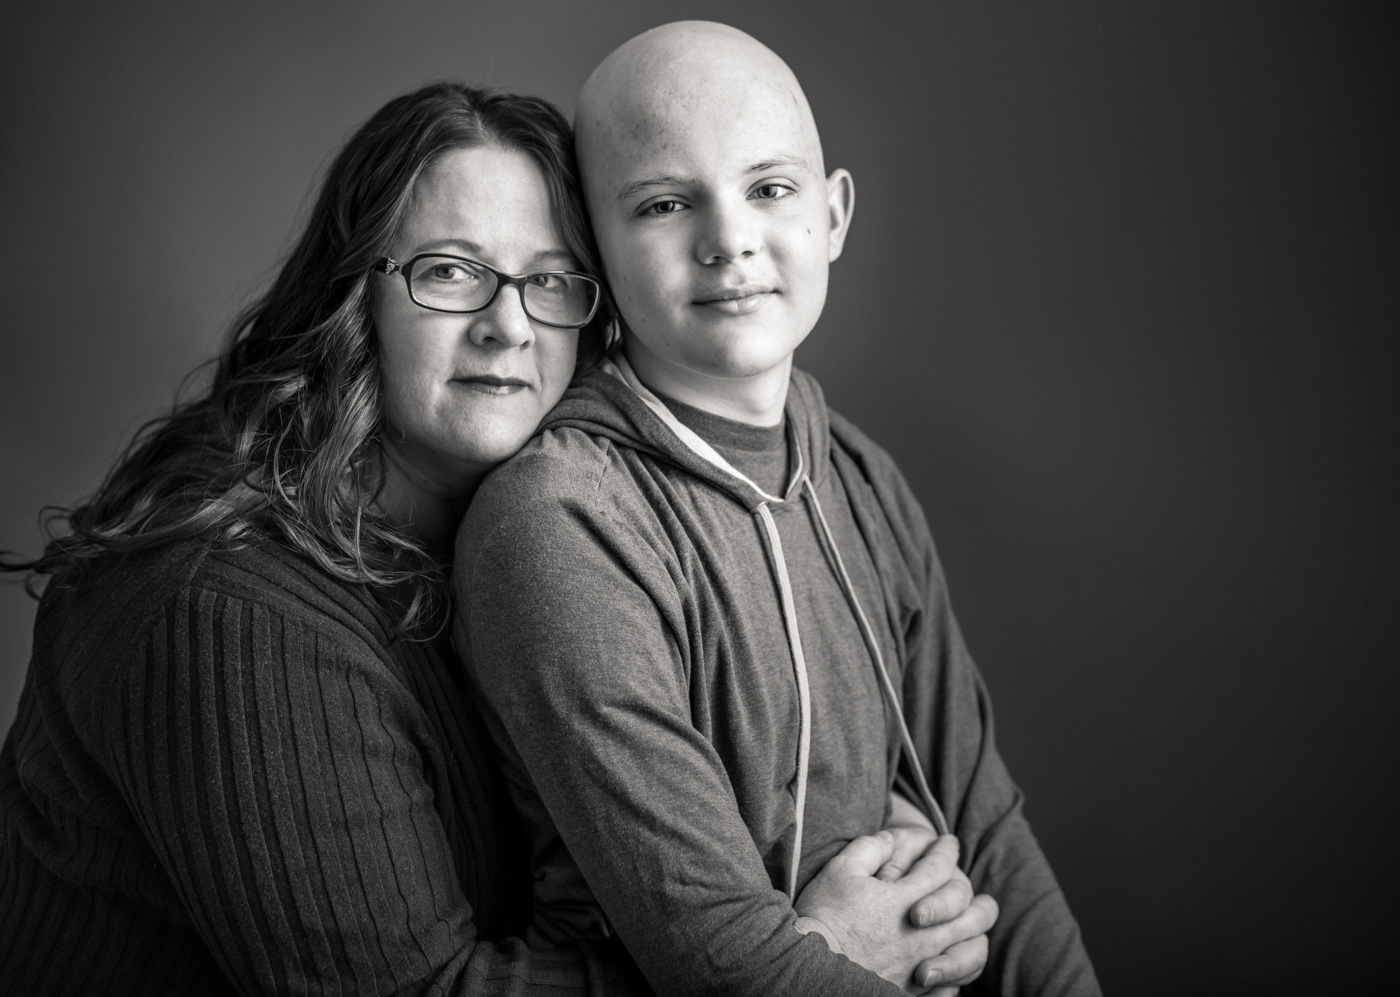 Flashes of Hope, portrait of a mother hugger her son who is fighting cancer. Family, young, man, boy, loving, warm, together, resilience, authentic, love, Nashville, portrait, editorial, documentary, news, photographer, Kristina Krug